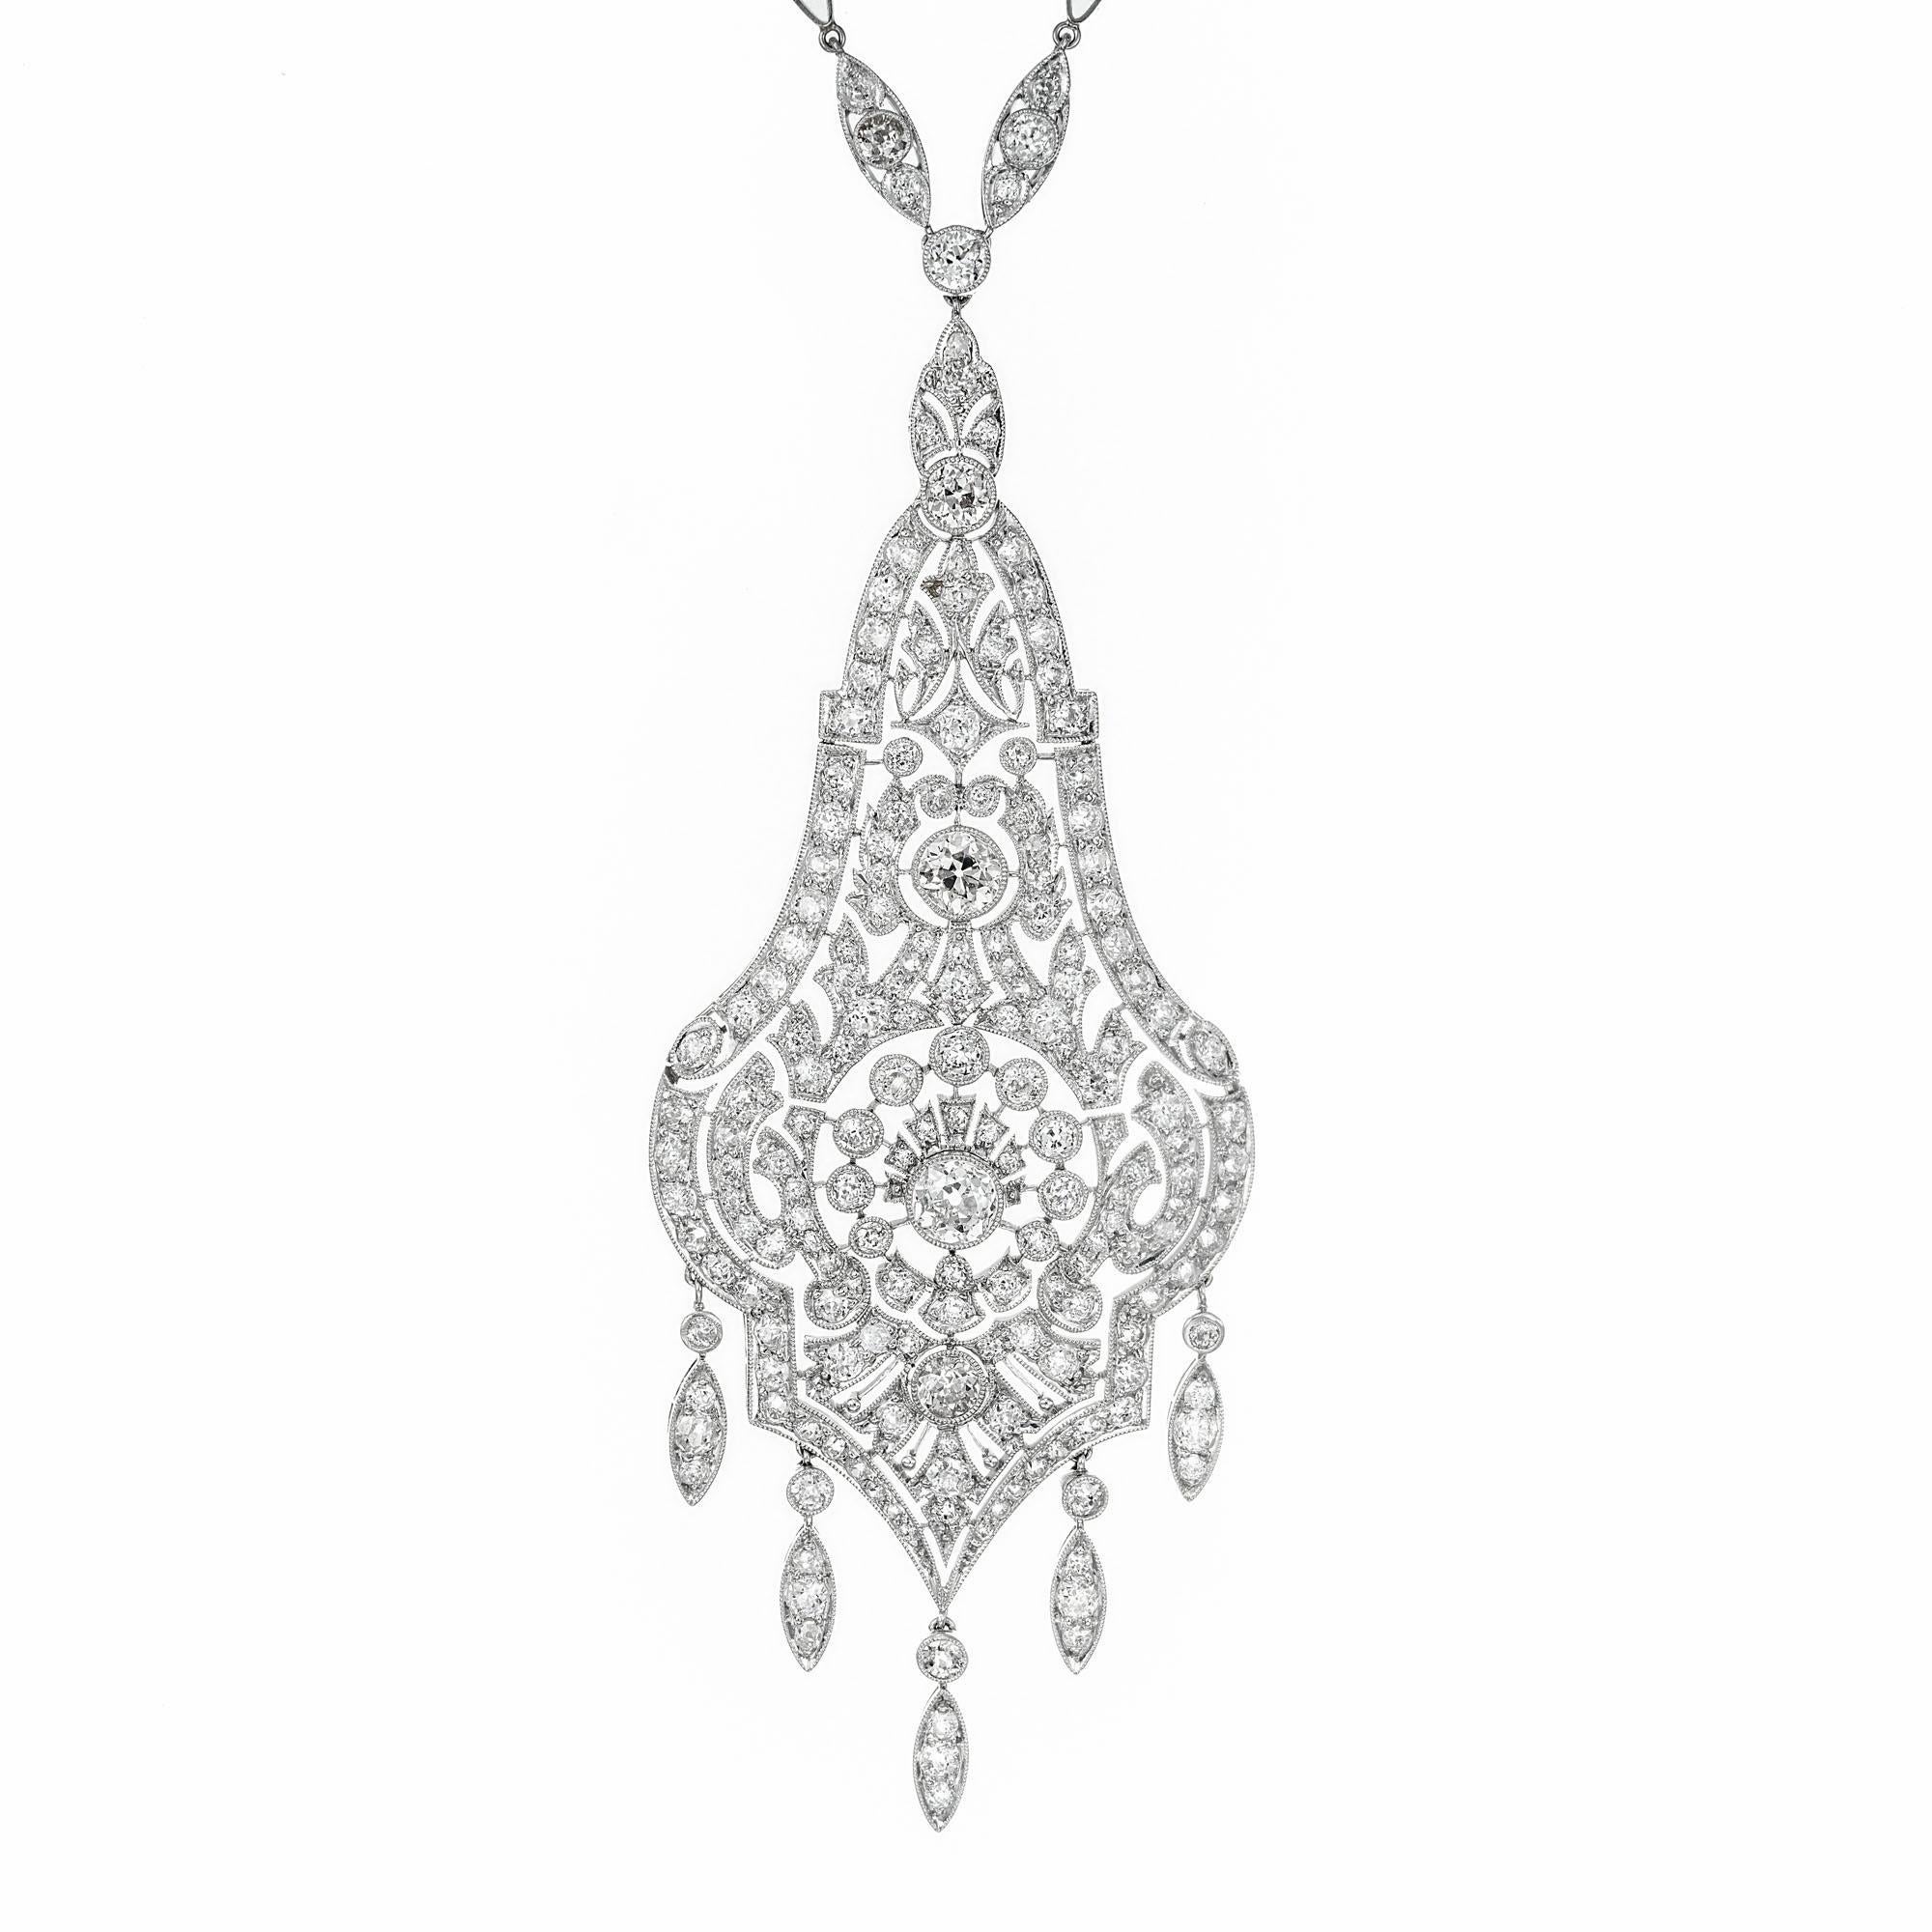 Edwardian Belle Époque diamond pendant necklace. Circa 1910. Three section diamond filled hinged pendant with 5 dangles at the bottom set in platinum. Pendant is Handmade with a diamond and swirl link chain.  Old European cut diamonds approximately